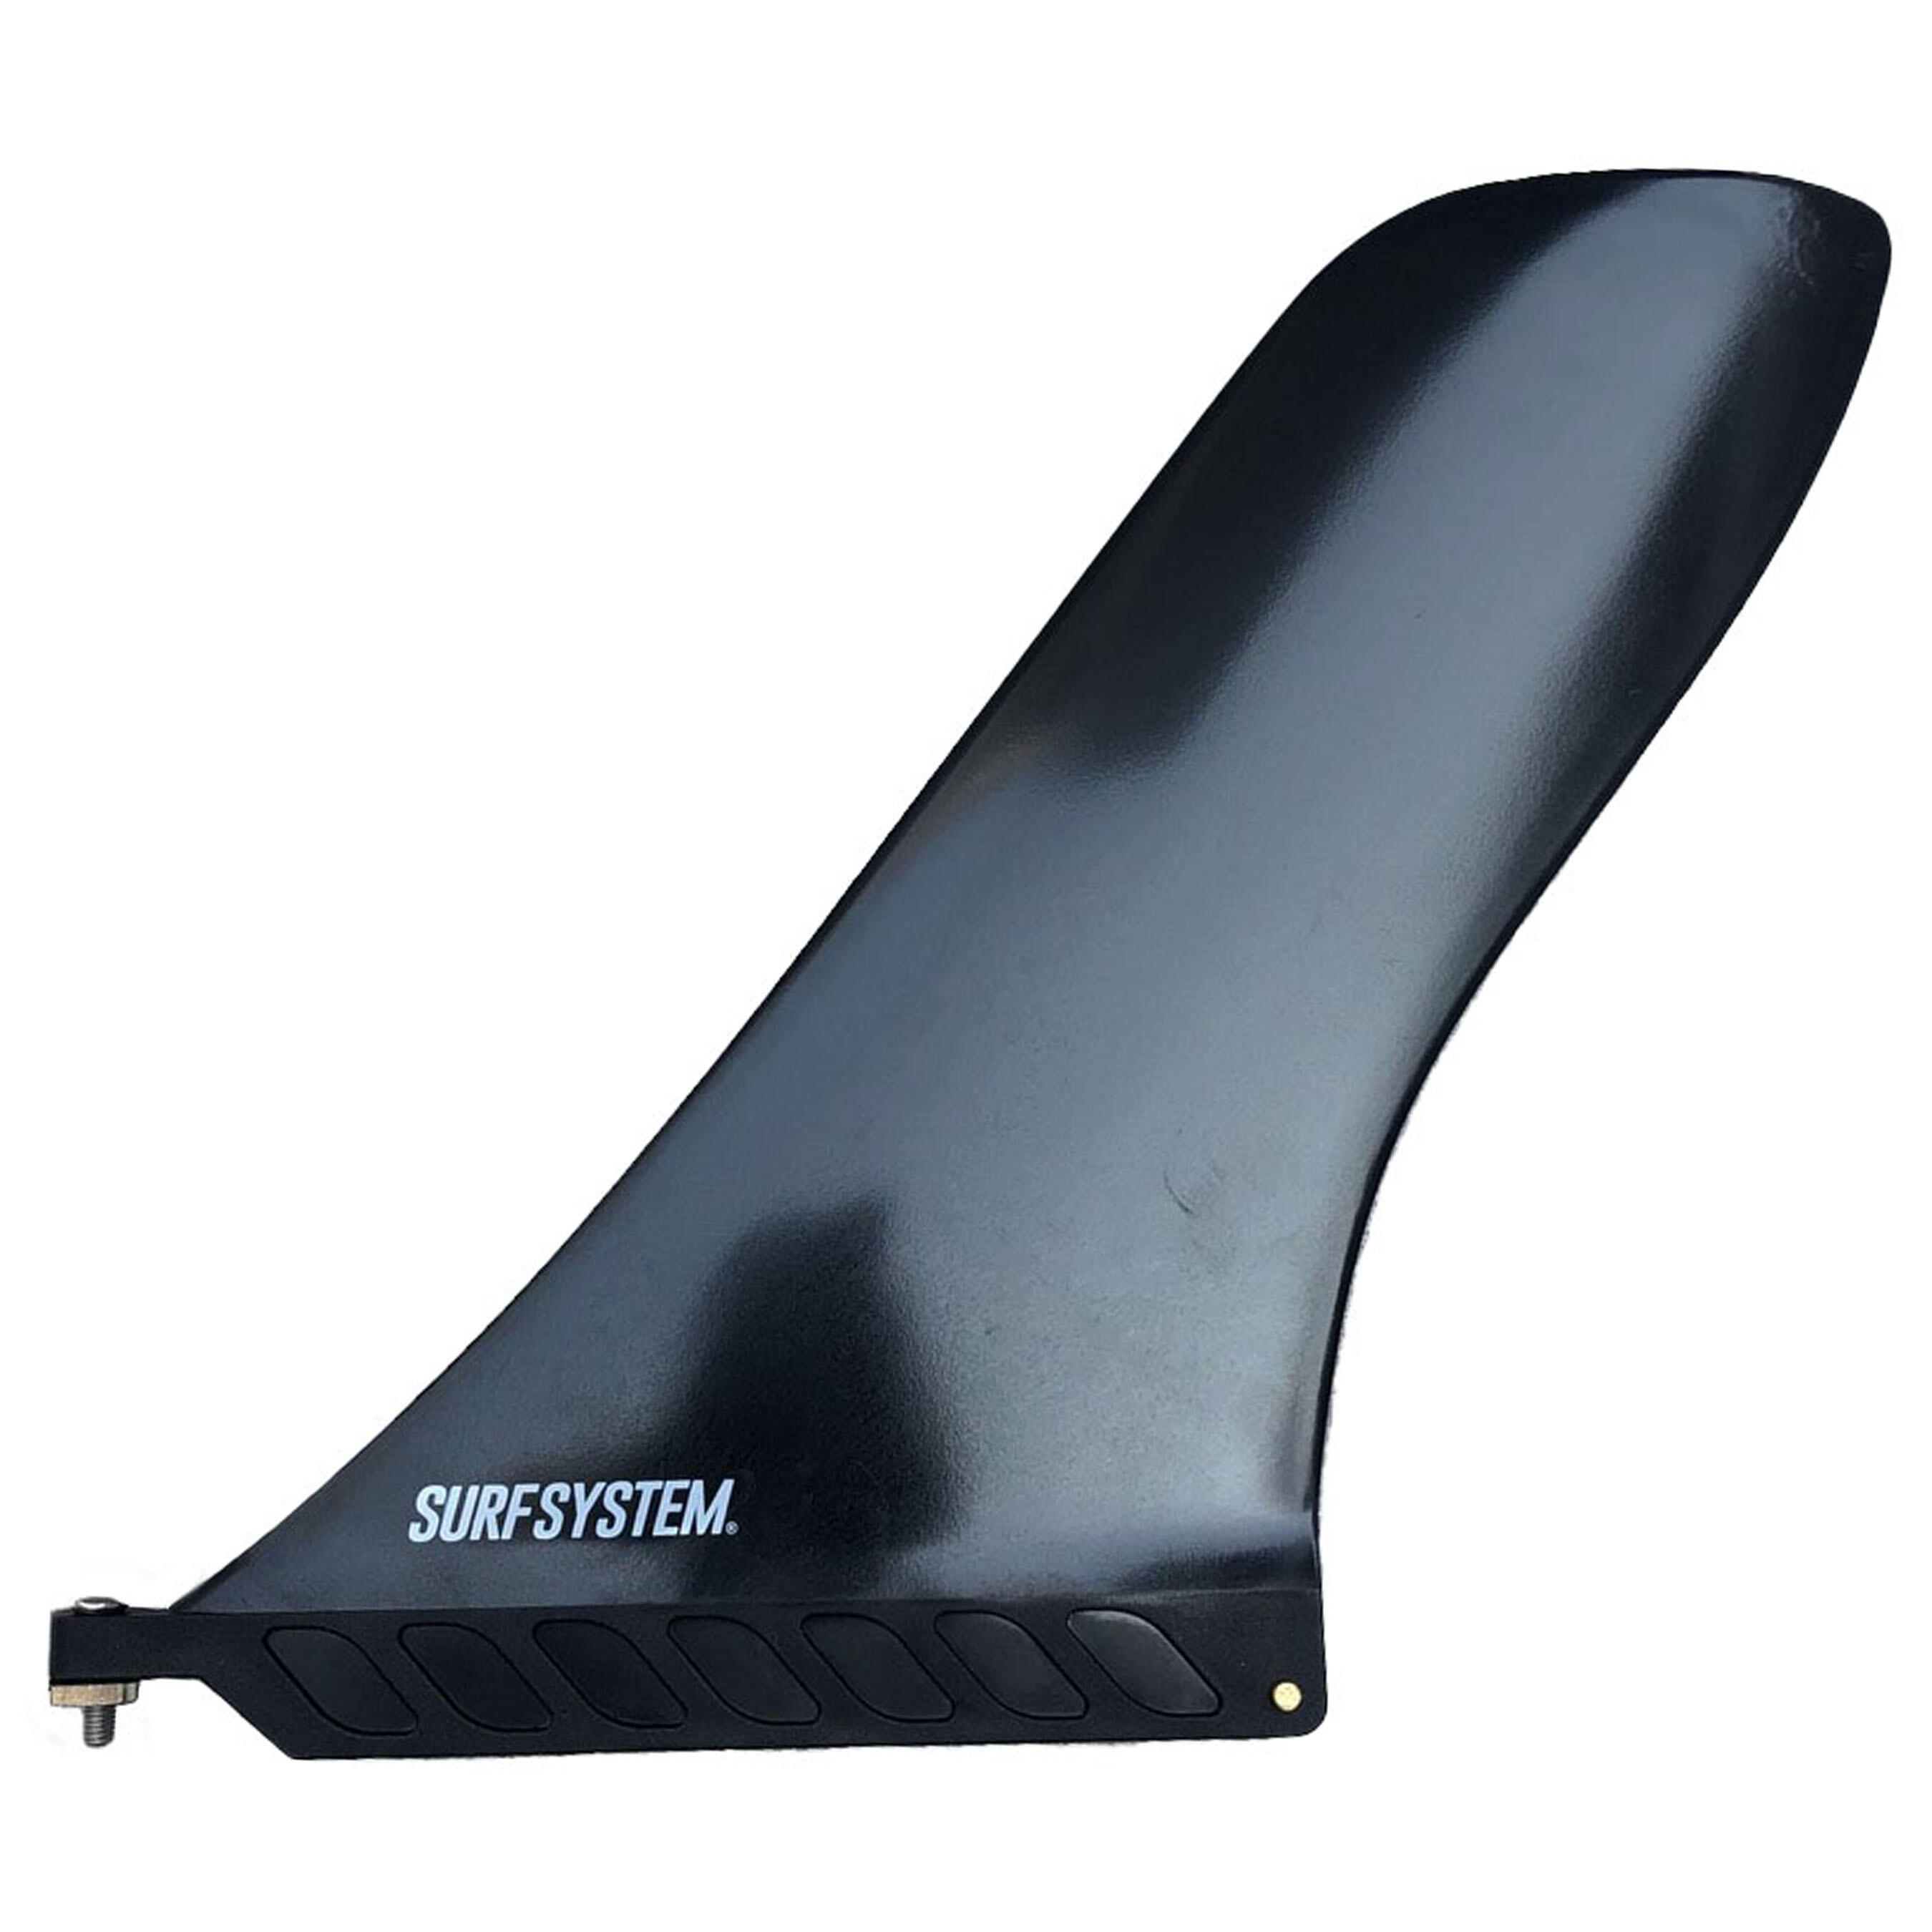 SURFSYSTEM TOURING AND RACING STAND-UP PADDLEBOARDING FIN US BOX ATTACHMENT 10’ 